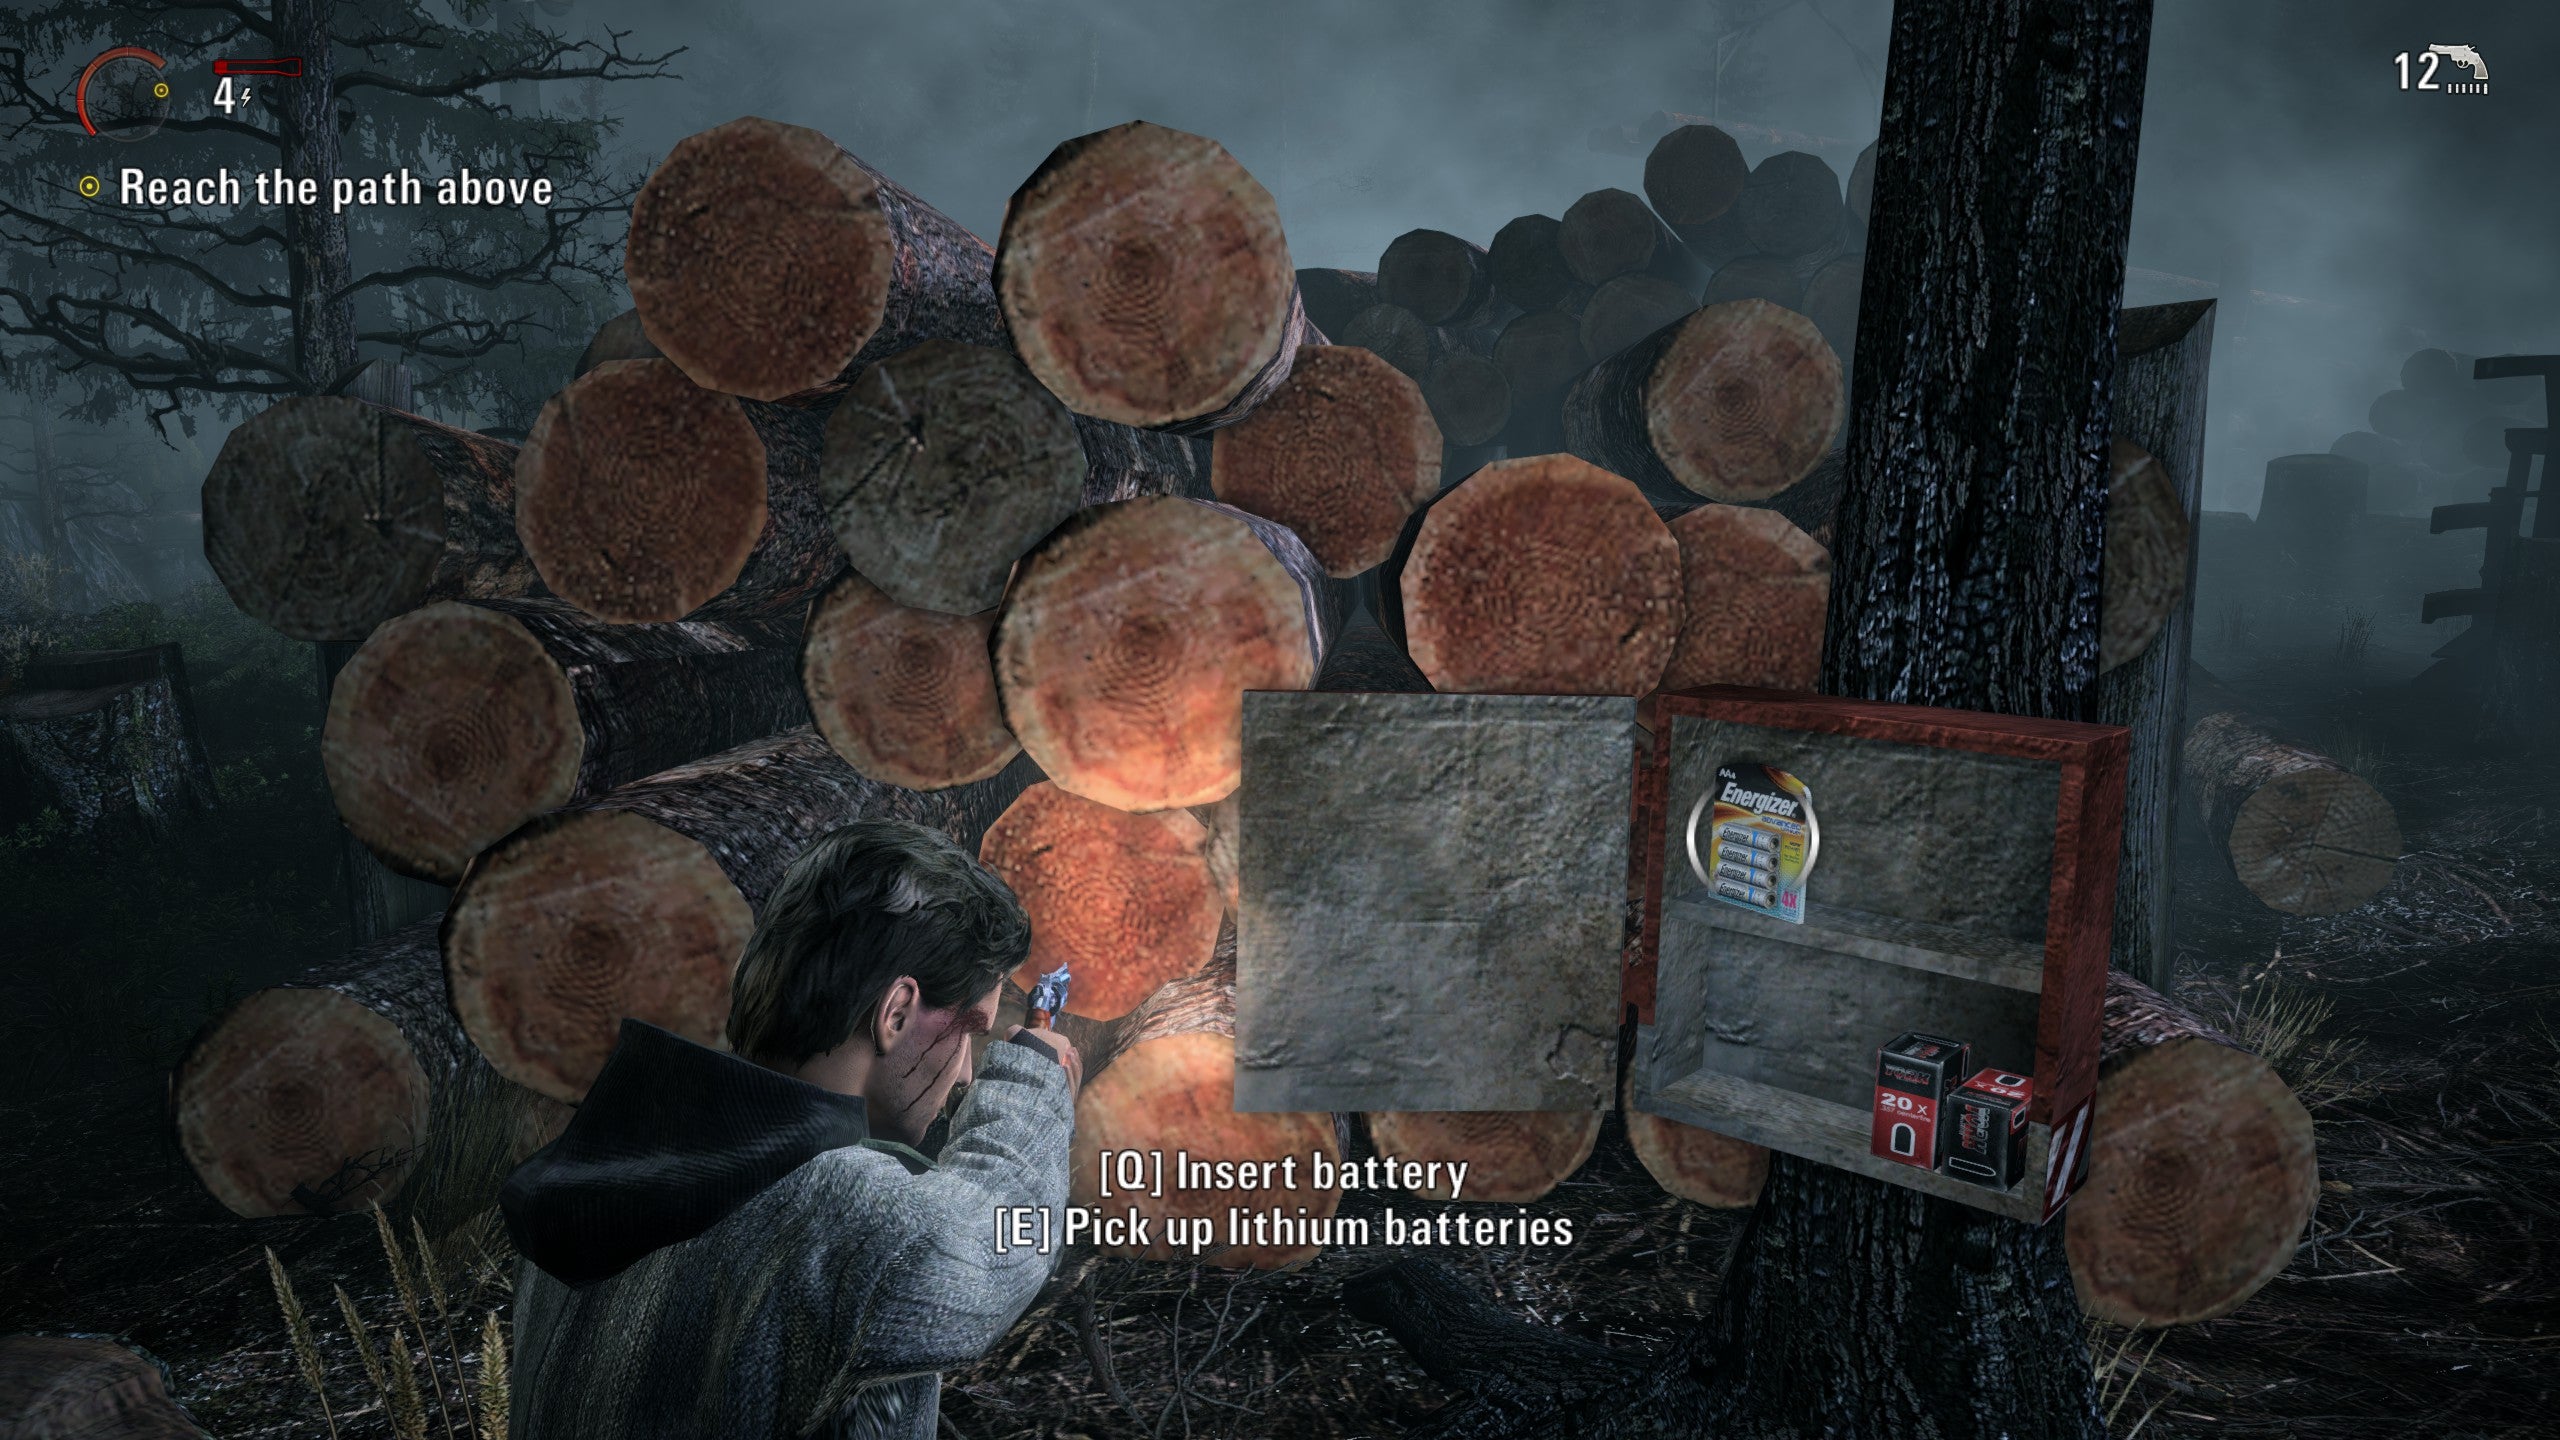 A screenshot of Alan Wake, showing some batteries and ammo in a container.